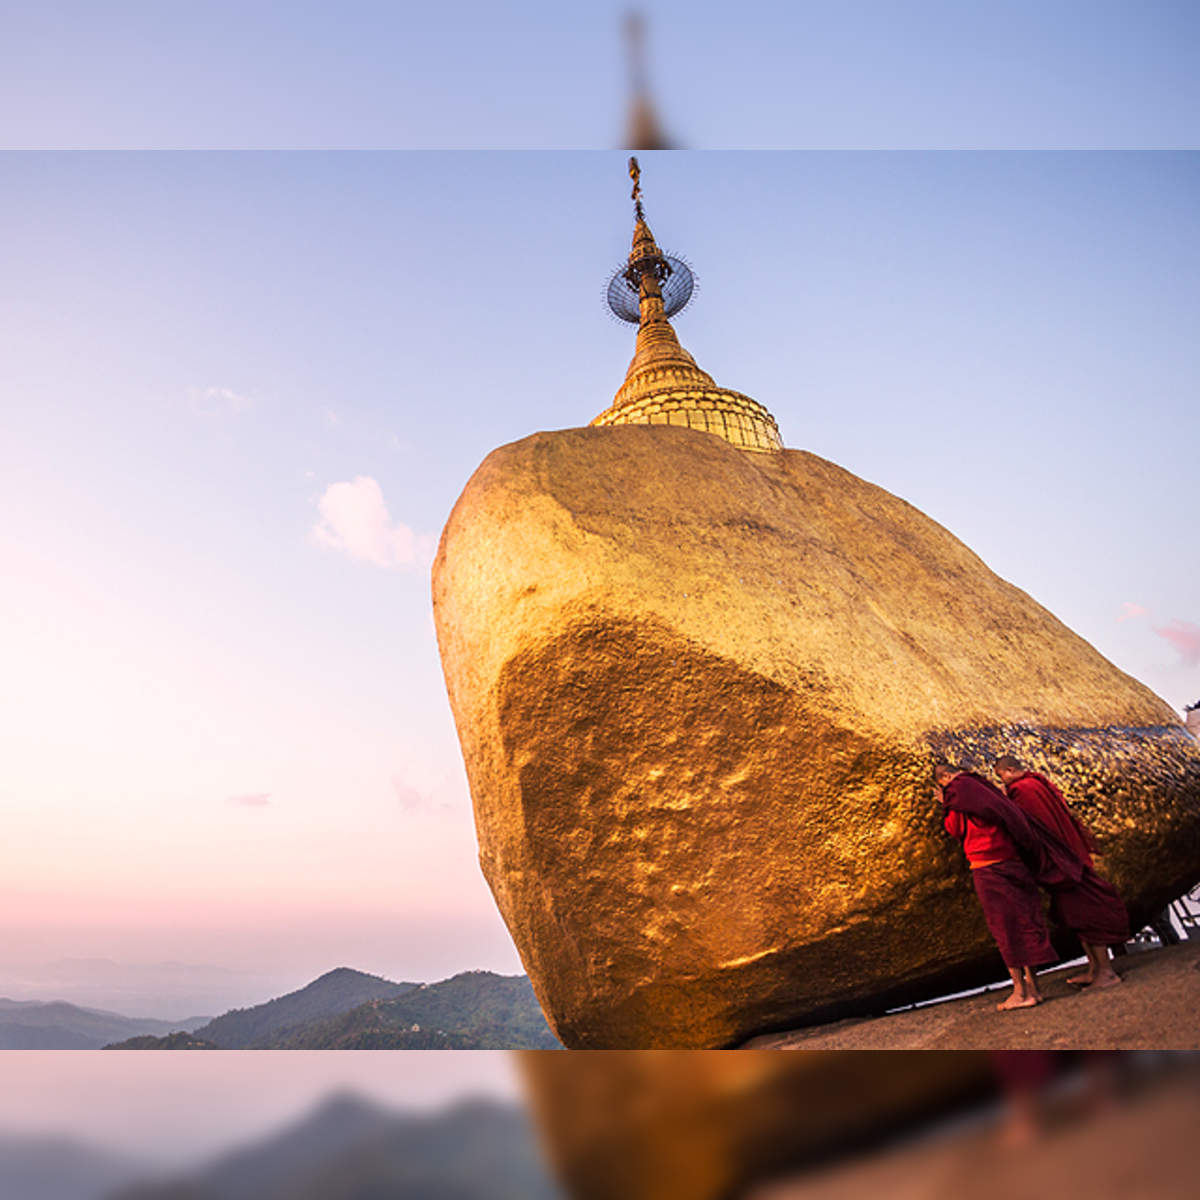 Gain spiritual inspiration from the gravity-defying Golden Rock in